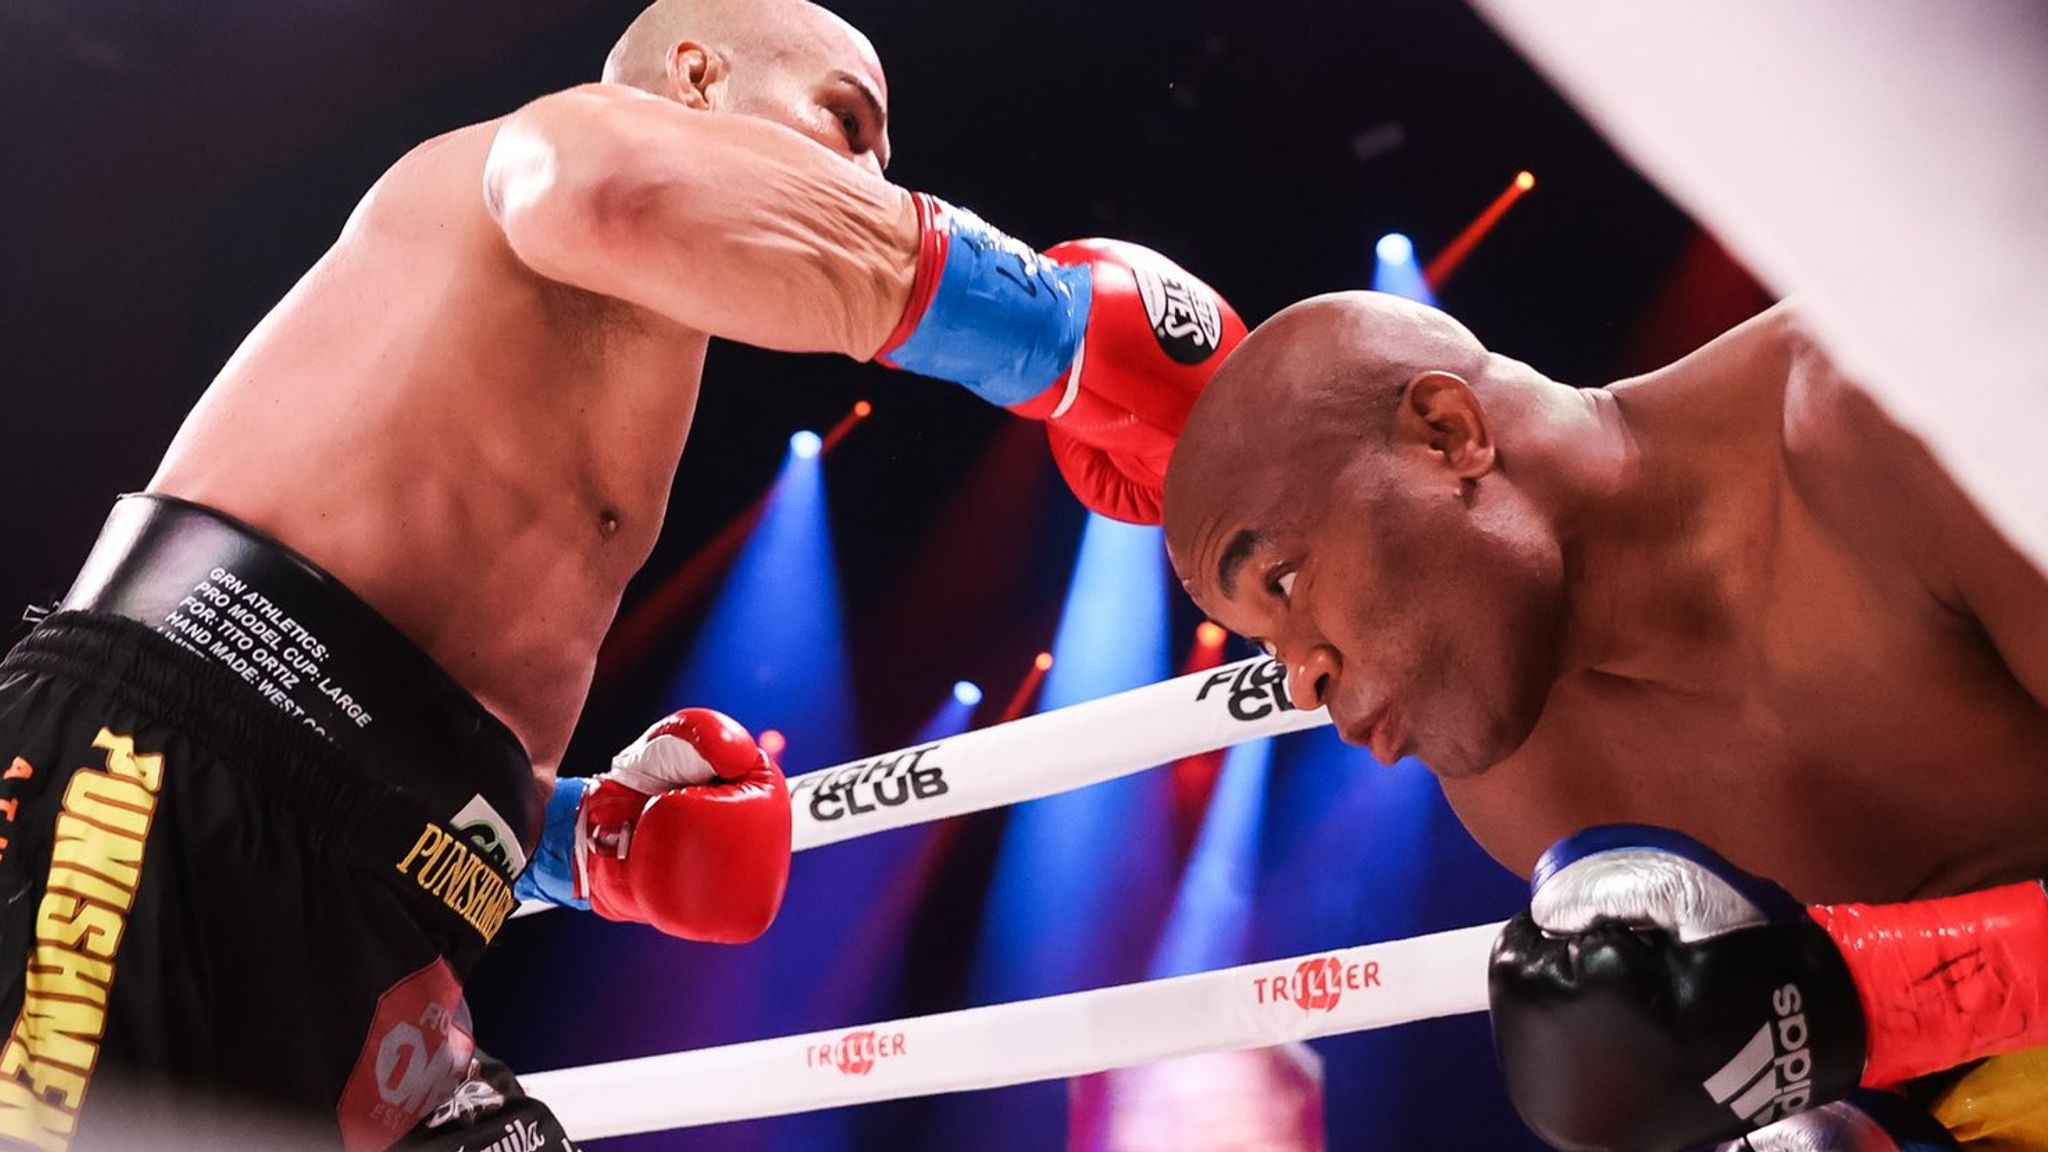 Anderson Silva knocks out Tito Ortiz in first round of boxing battle between UFC superstars Boxing News Sky Sports